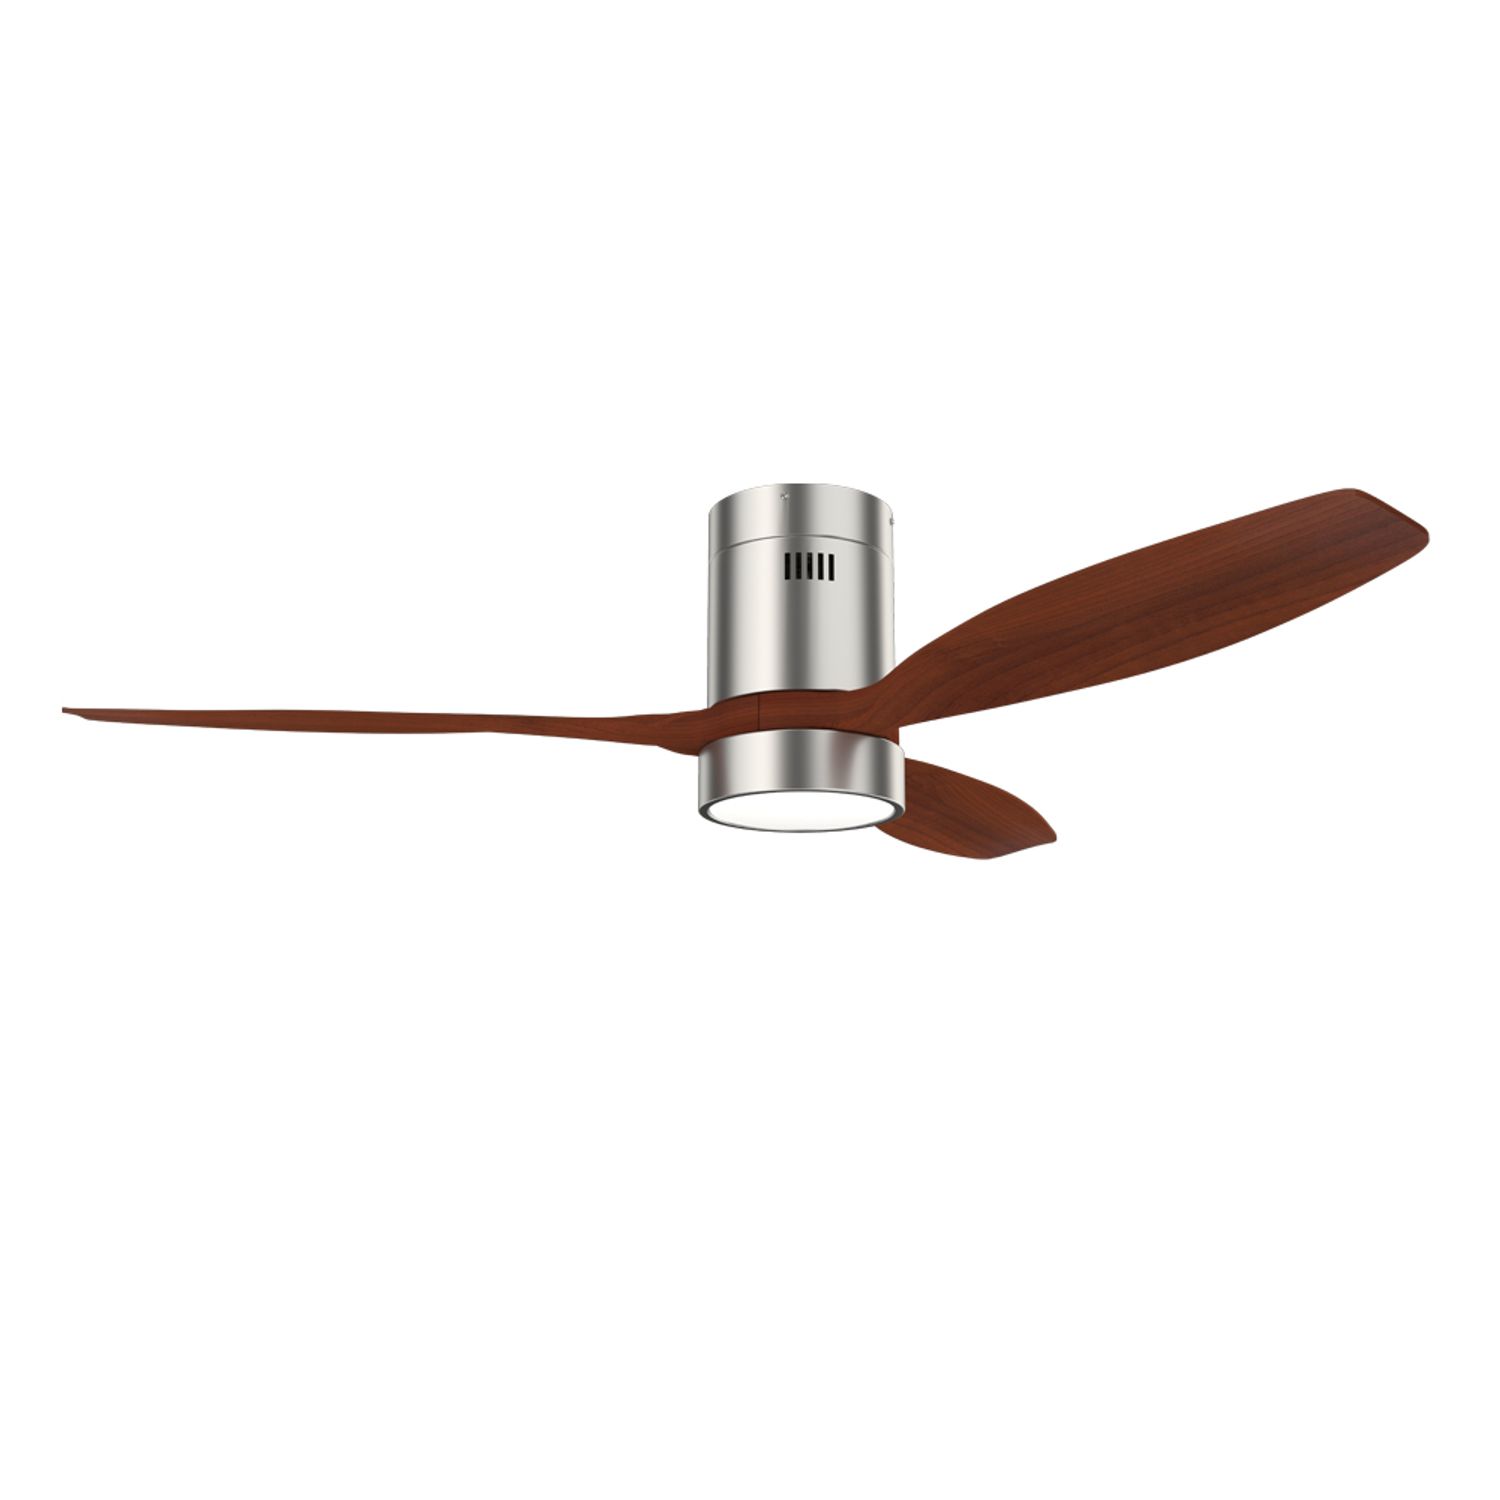 KBS dark wooden blade Indoor Ceiling Fan with Lights and Remote